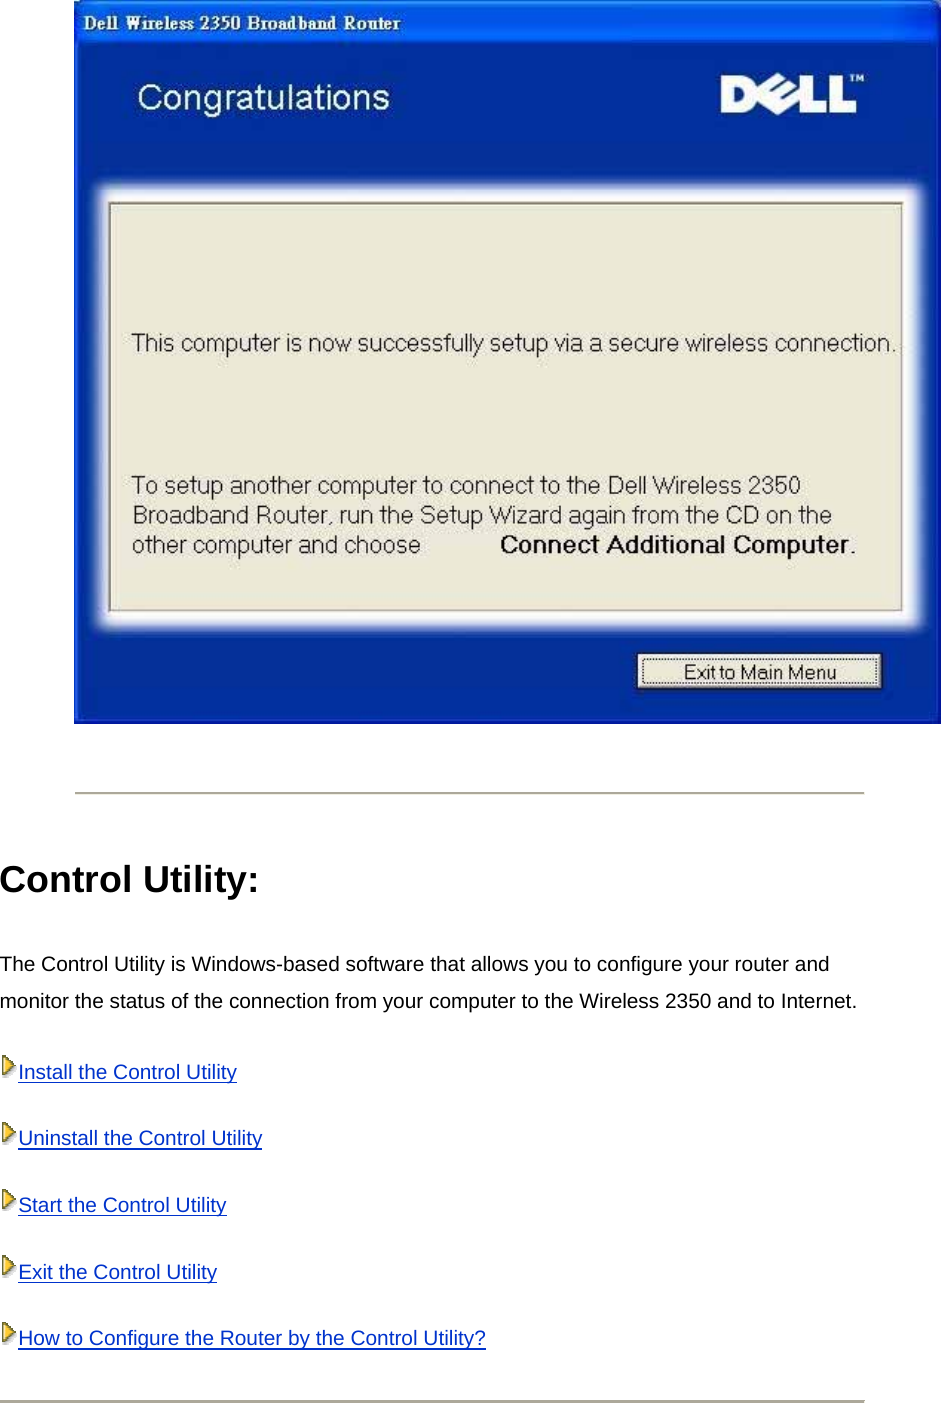     Control Utility:   The Control Utility is Windows-based software that allows you to configure your router and monitor the status of the connection from your computer to the Wireless 2350 and to Internet. Install the Control UtilityUninstall the Control UtilityStart the Control UtilityExit the Control UtilityHow to Configure the Router by the Control Utility? 